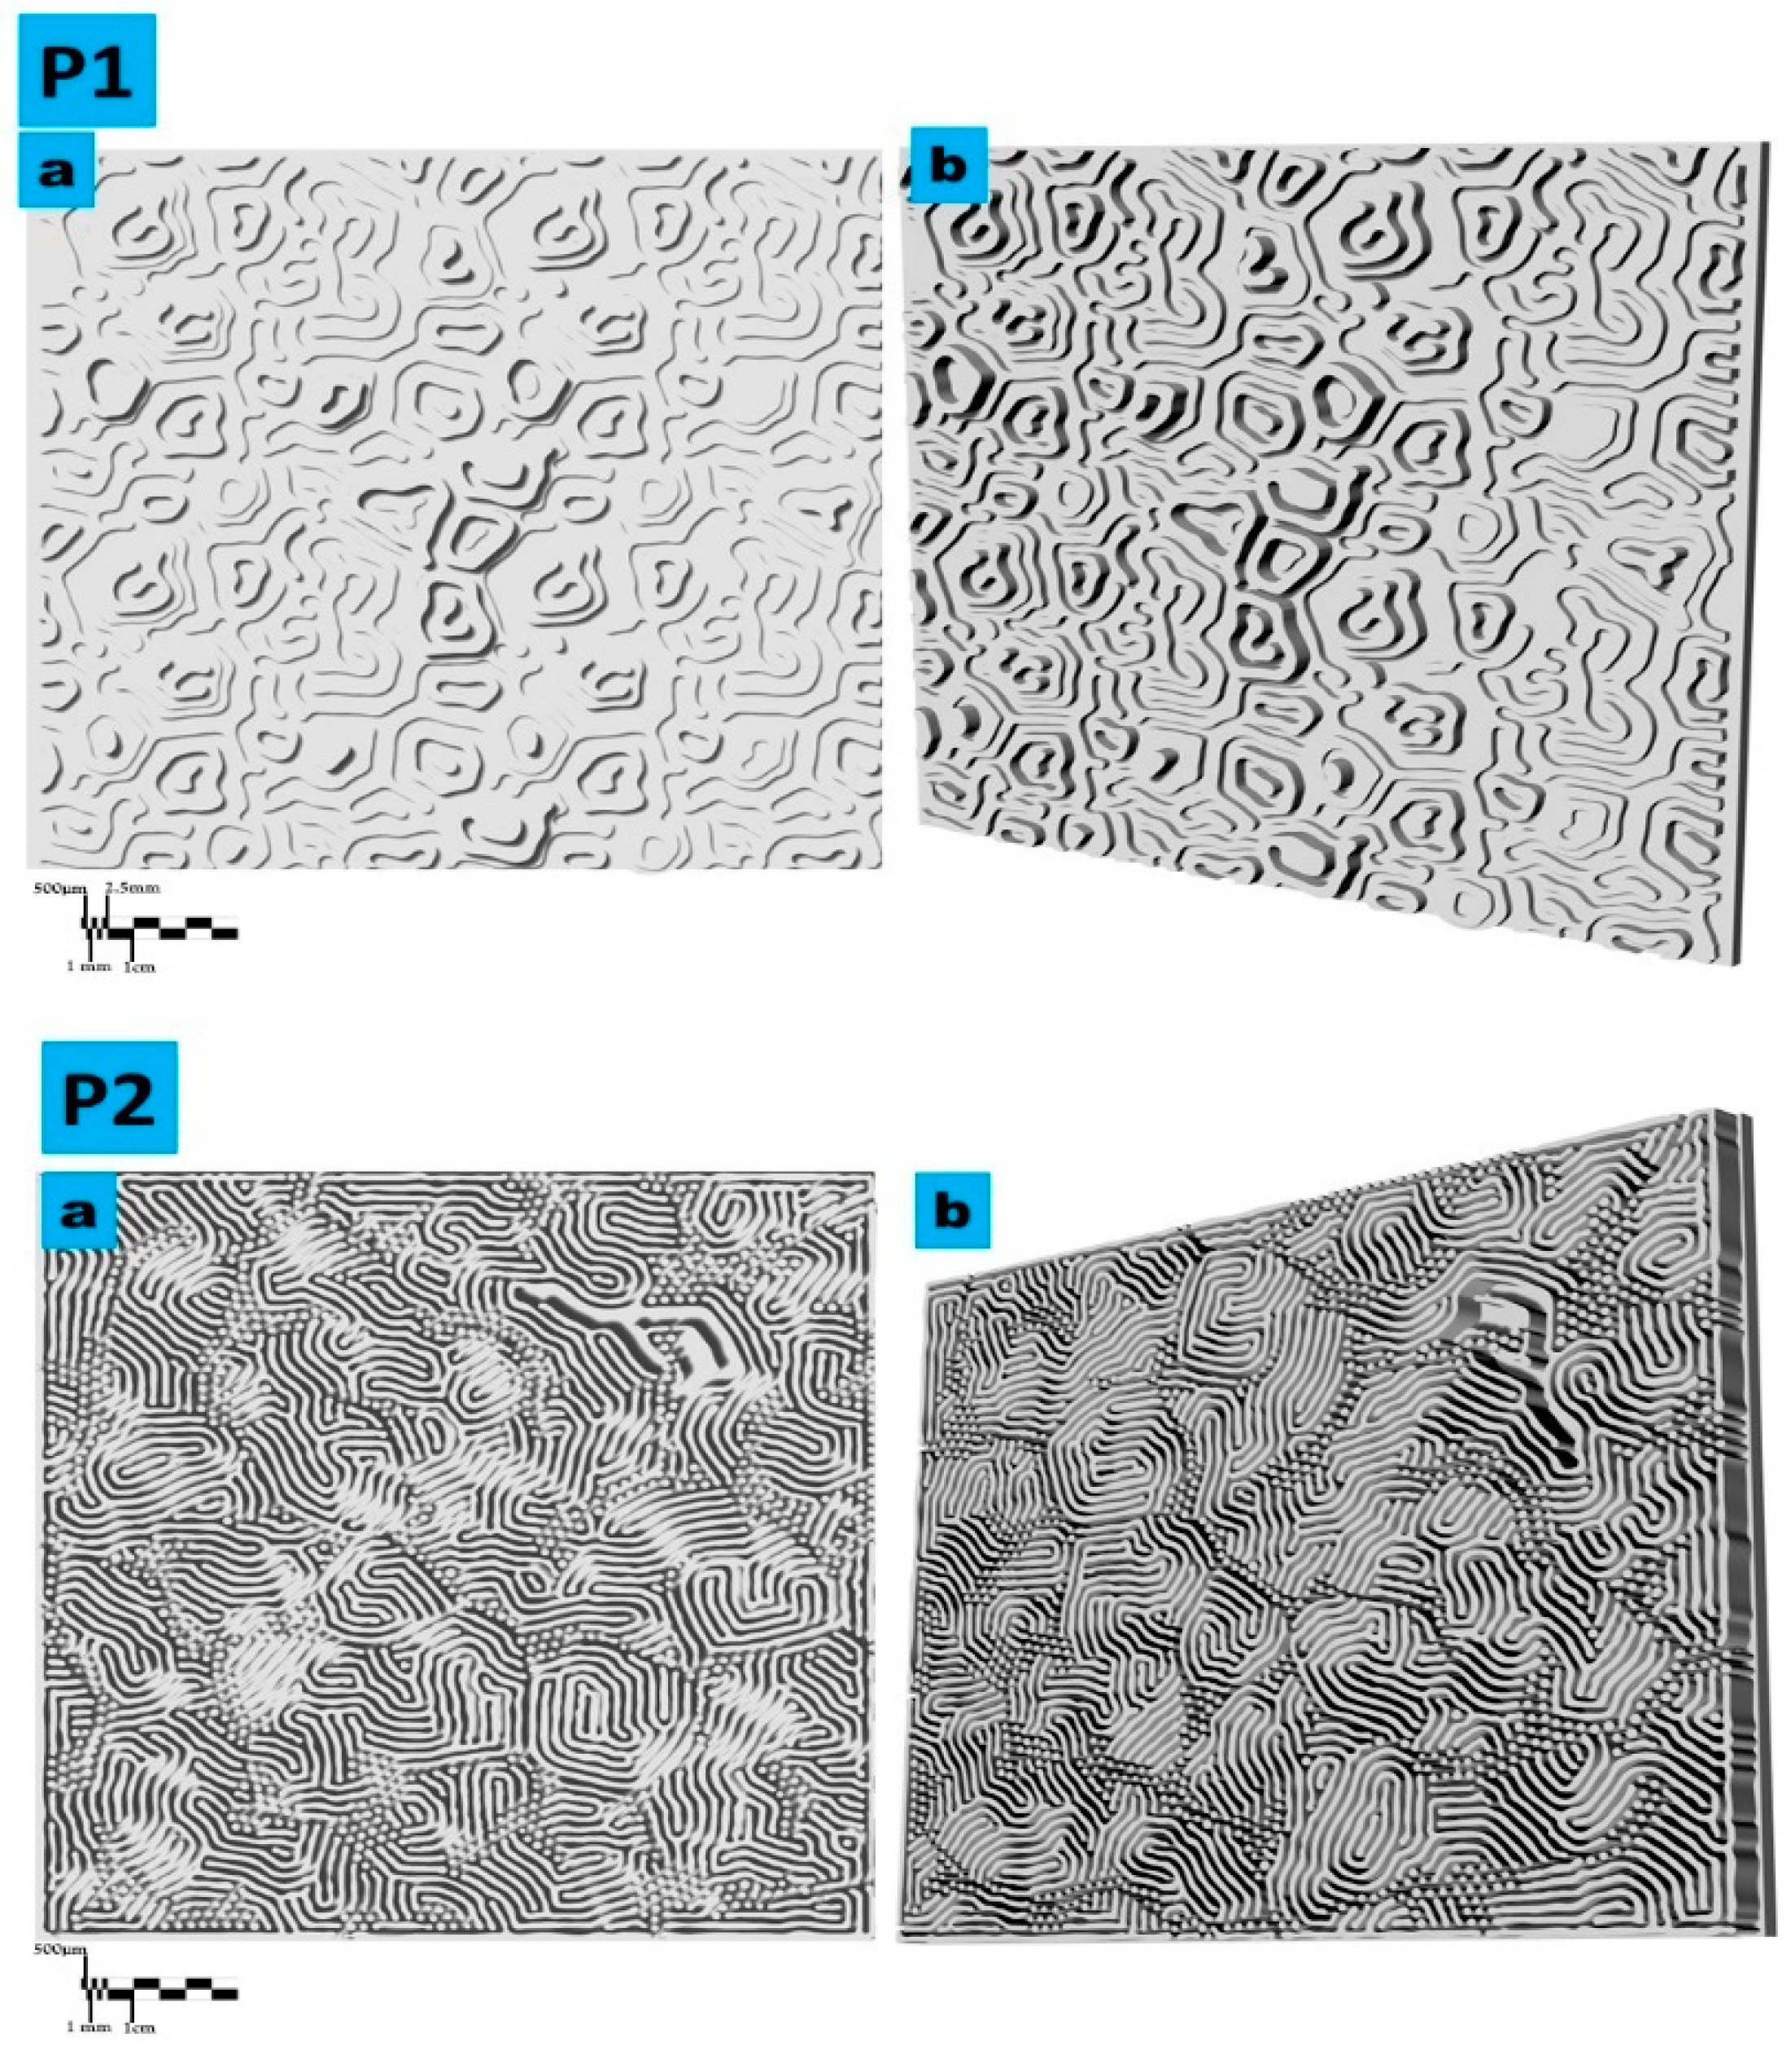 Buildings | Free Full-Text | 3D-Printed Immobilization Tiles for Passive Reaction–Diffusion Bioreceptive (Gierer–Meinhardt of Strains’ Algal Multi-Scale Model)